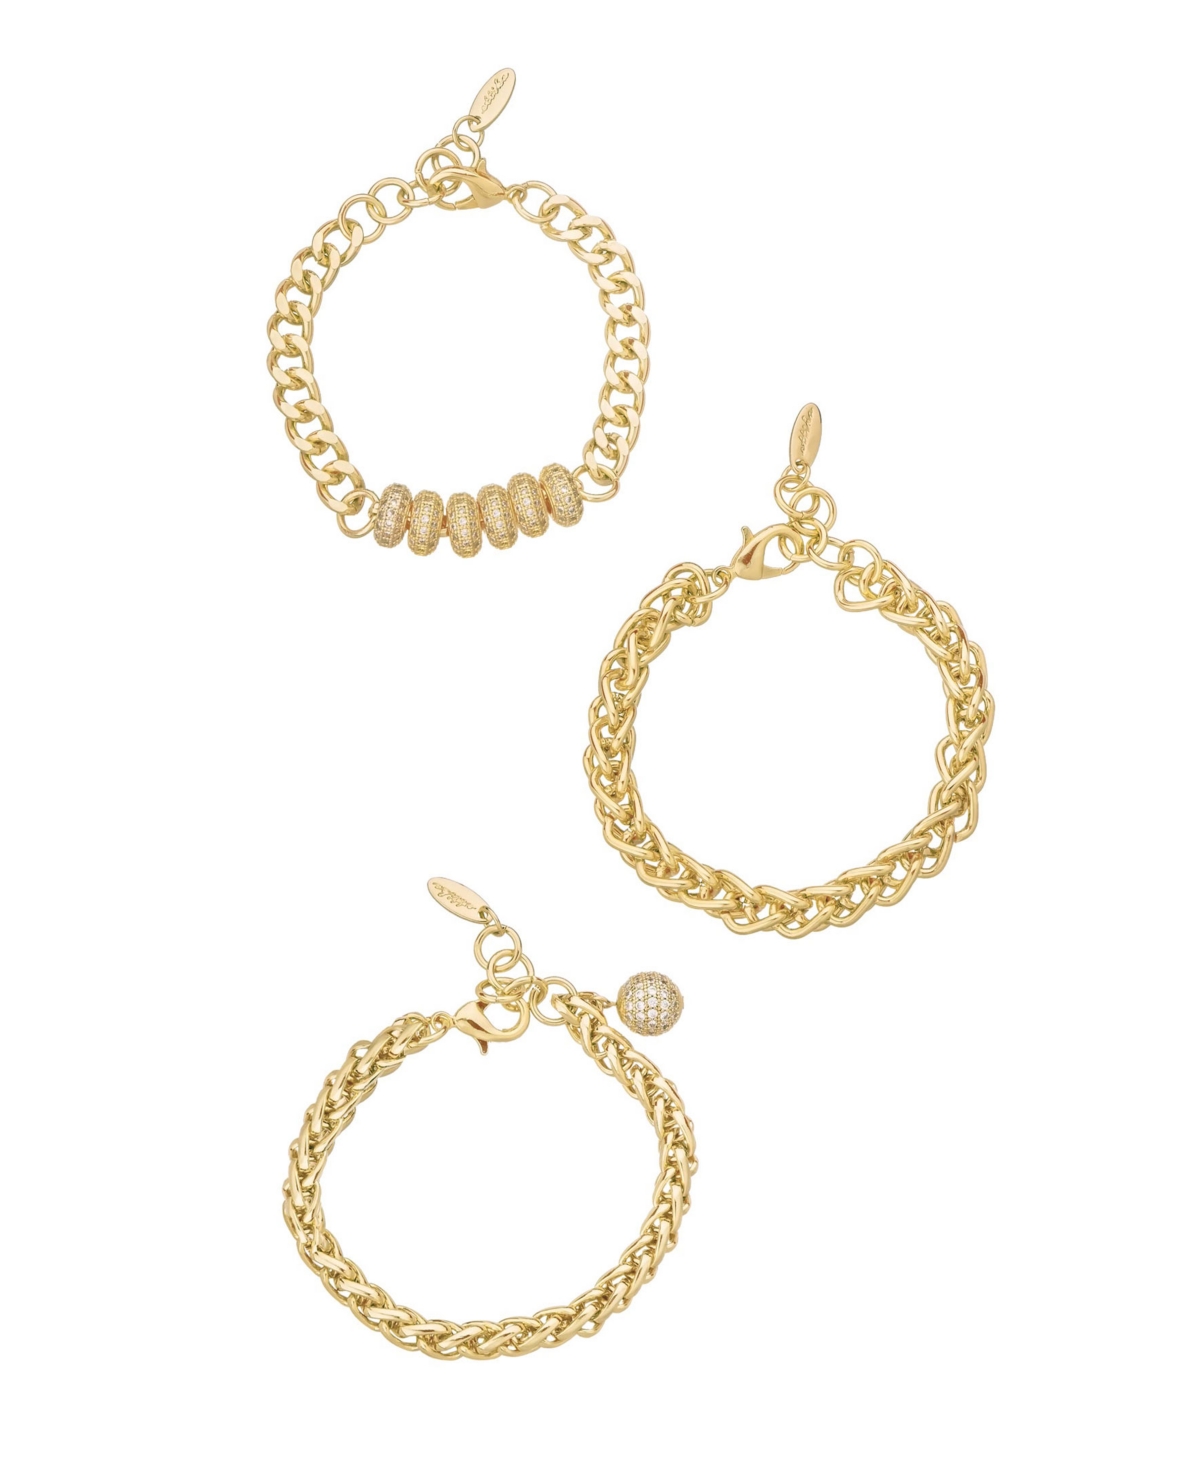 Gold-Plated Chain Stacking Bracelet Set of 3 - Gold-Plated